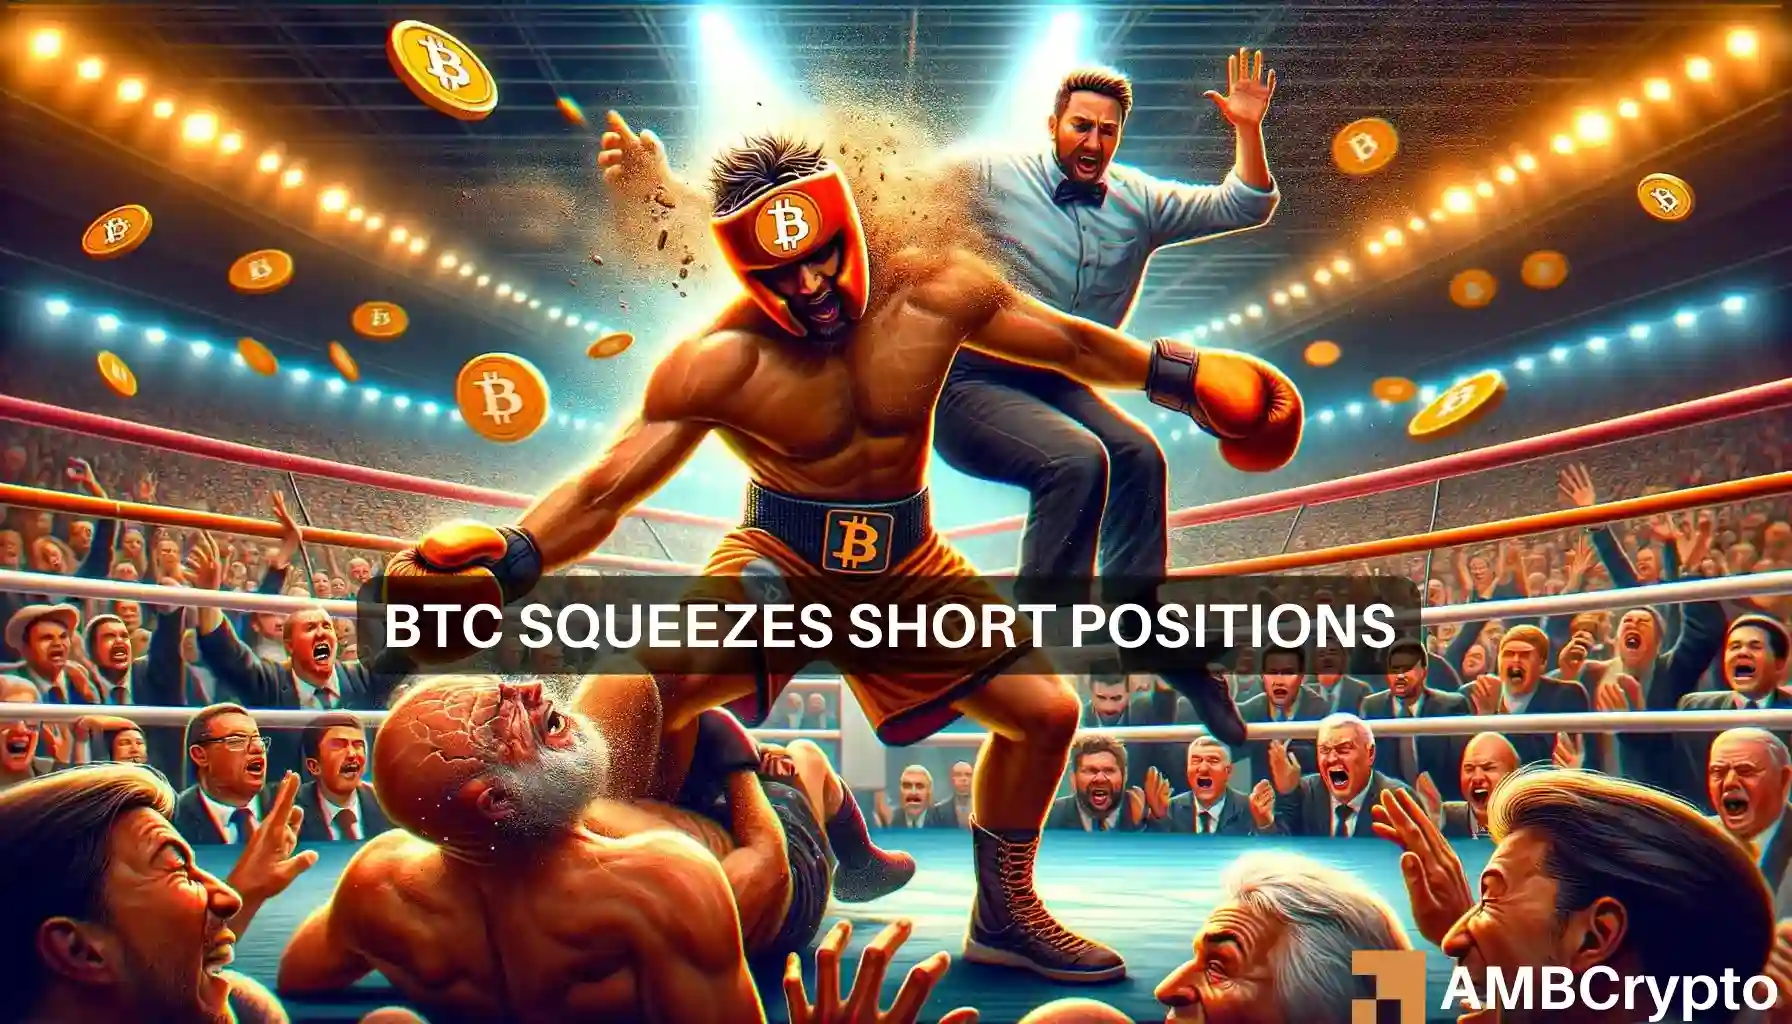 Bitcoin’s $259M short squeeze: What next as prices fall below $70K?